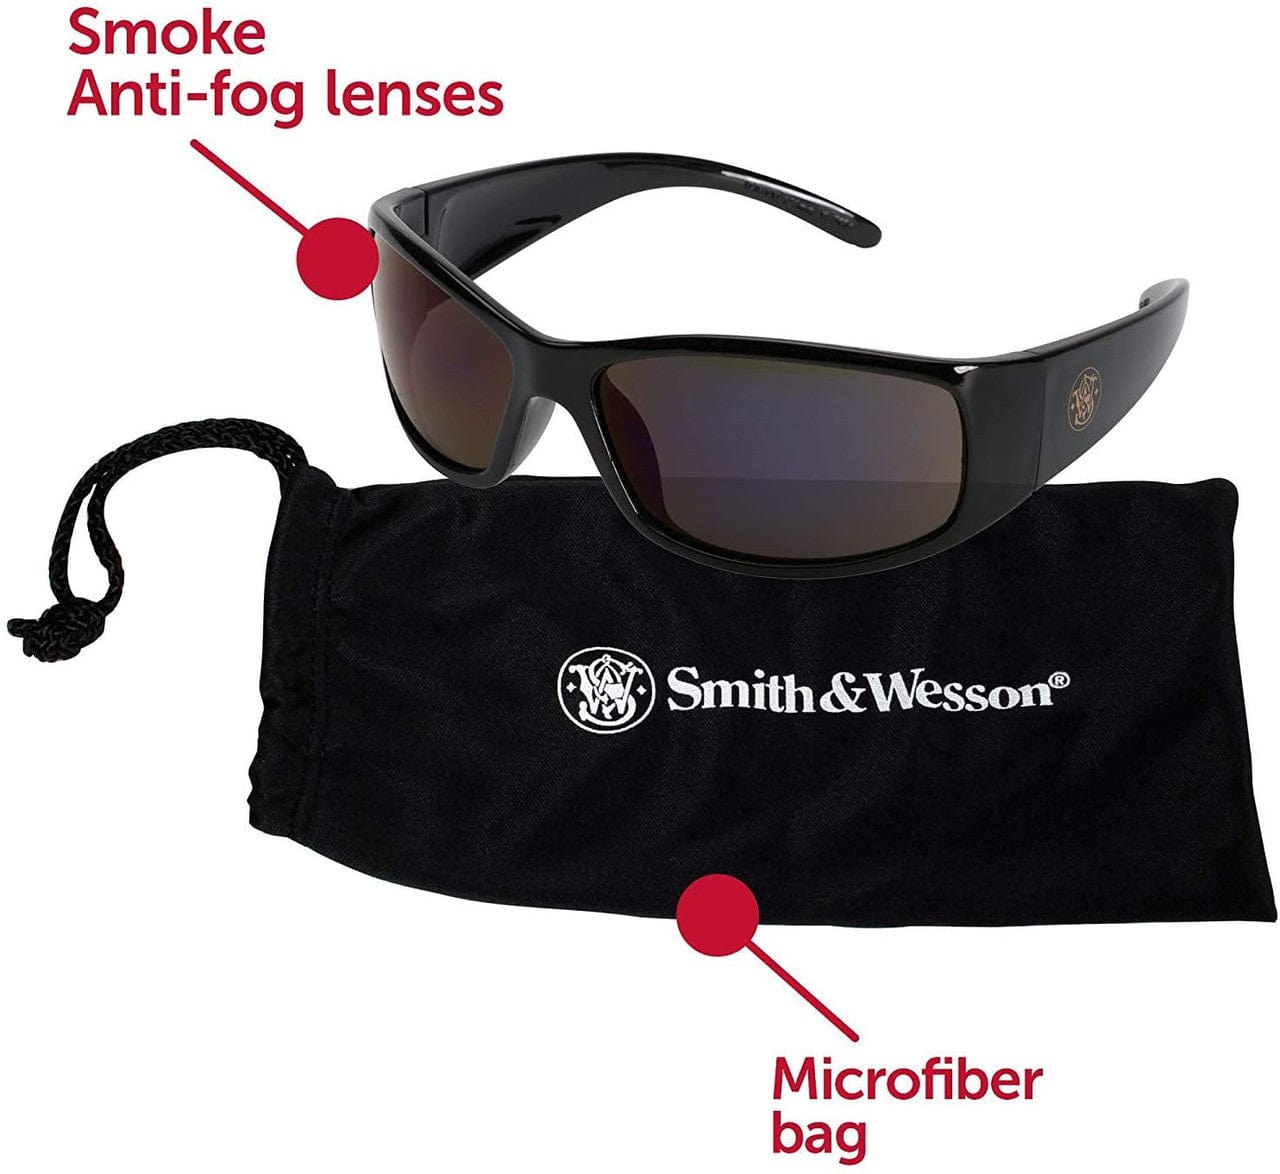 Smith & Wesson Elite Safety Glasses with Smoke Anti-Fog Lens 21303 Key Features